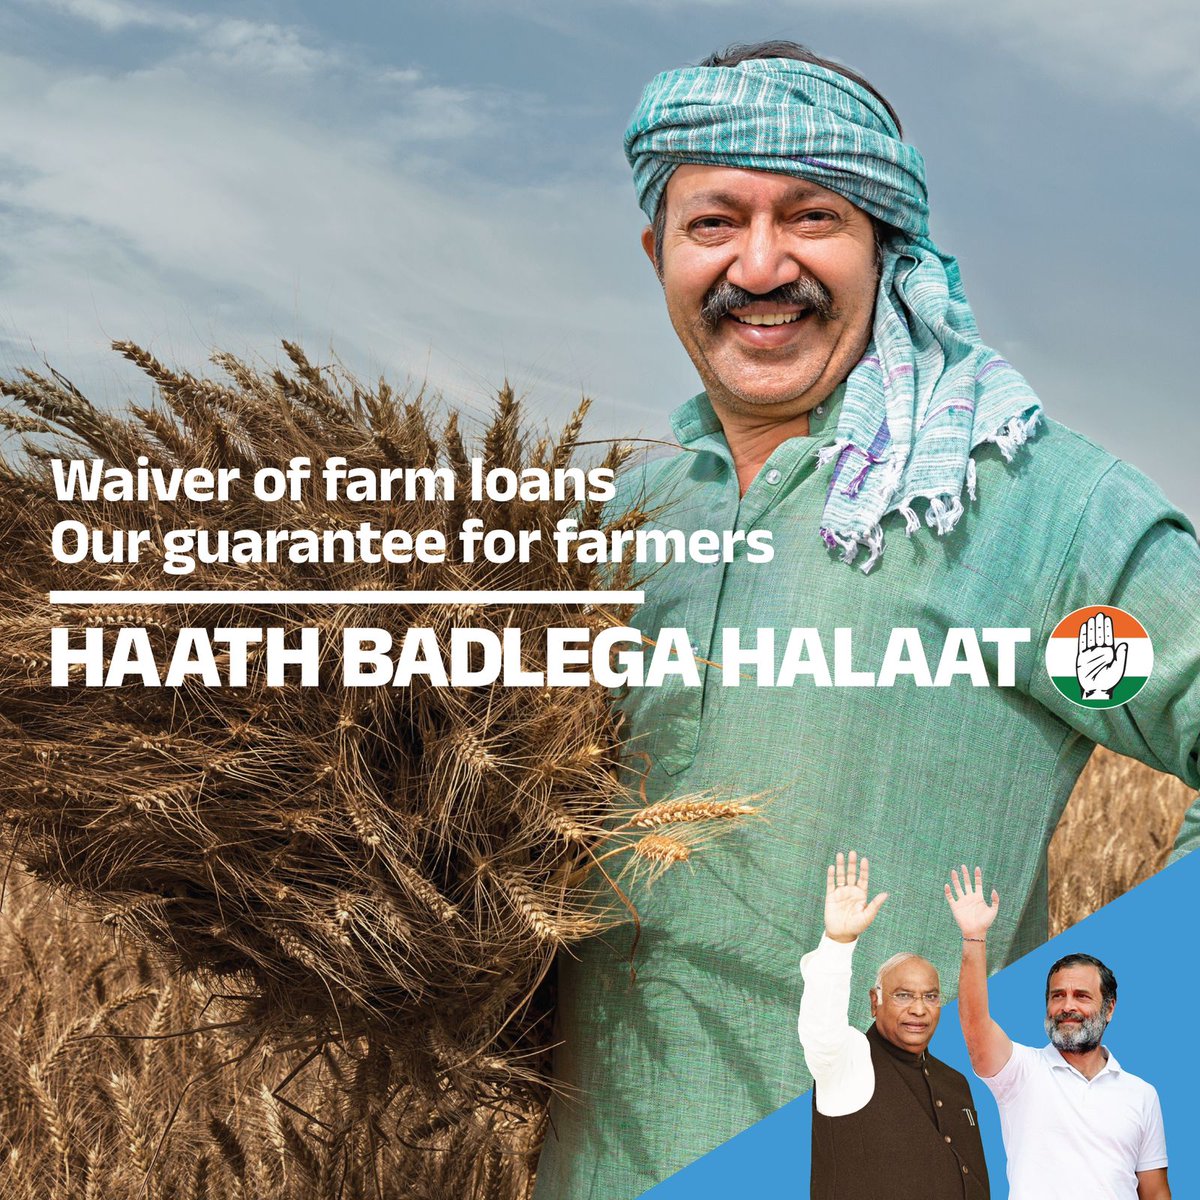 𝐂𝐨𝐧𝐠𝐫𝐞𝐬𝐬' 𝐆𝐮𝐚𝐫𝐚𝐧𝐭𝐞𝐞

A Standing Farm Loan Waiver Commission will be set up to waive loans of farmers.

#HaathBadlegaHalaat ✋